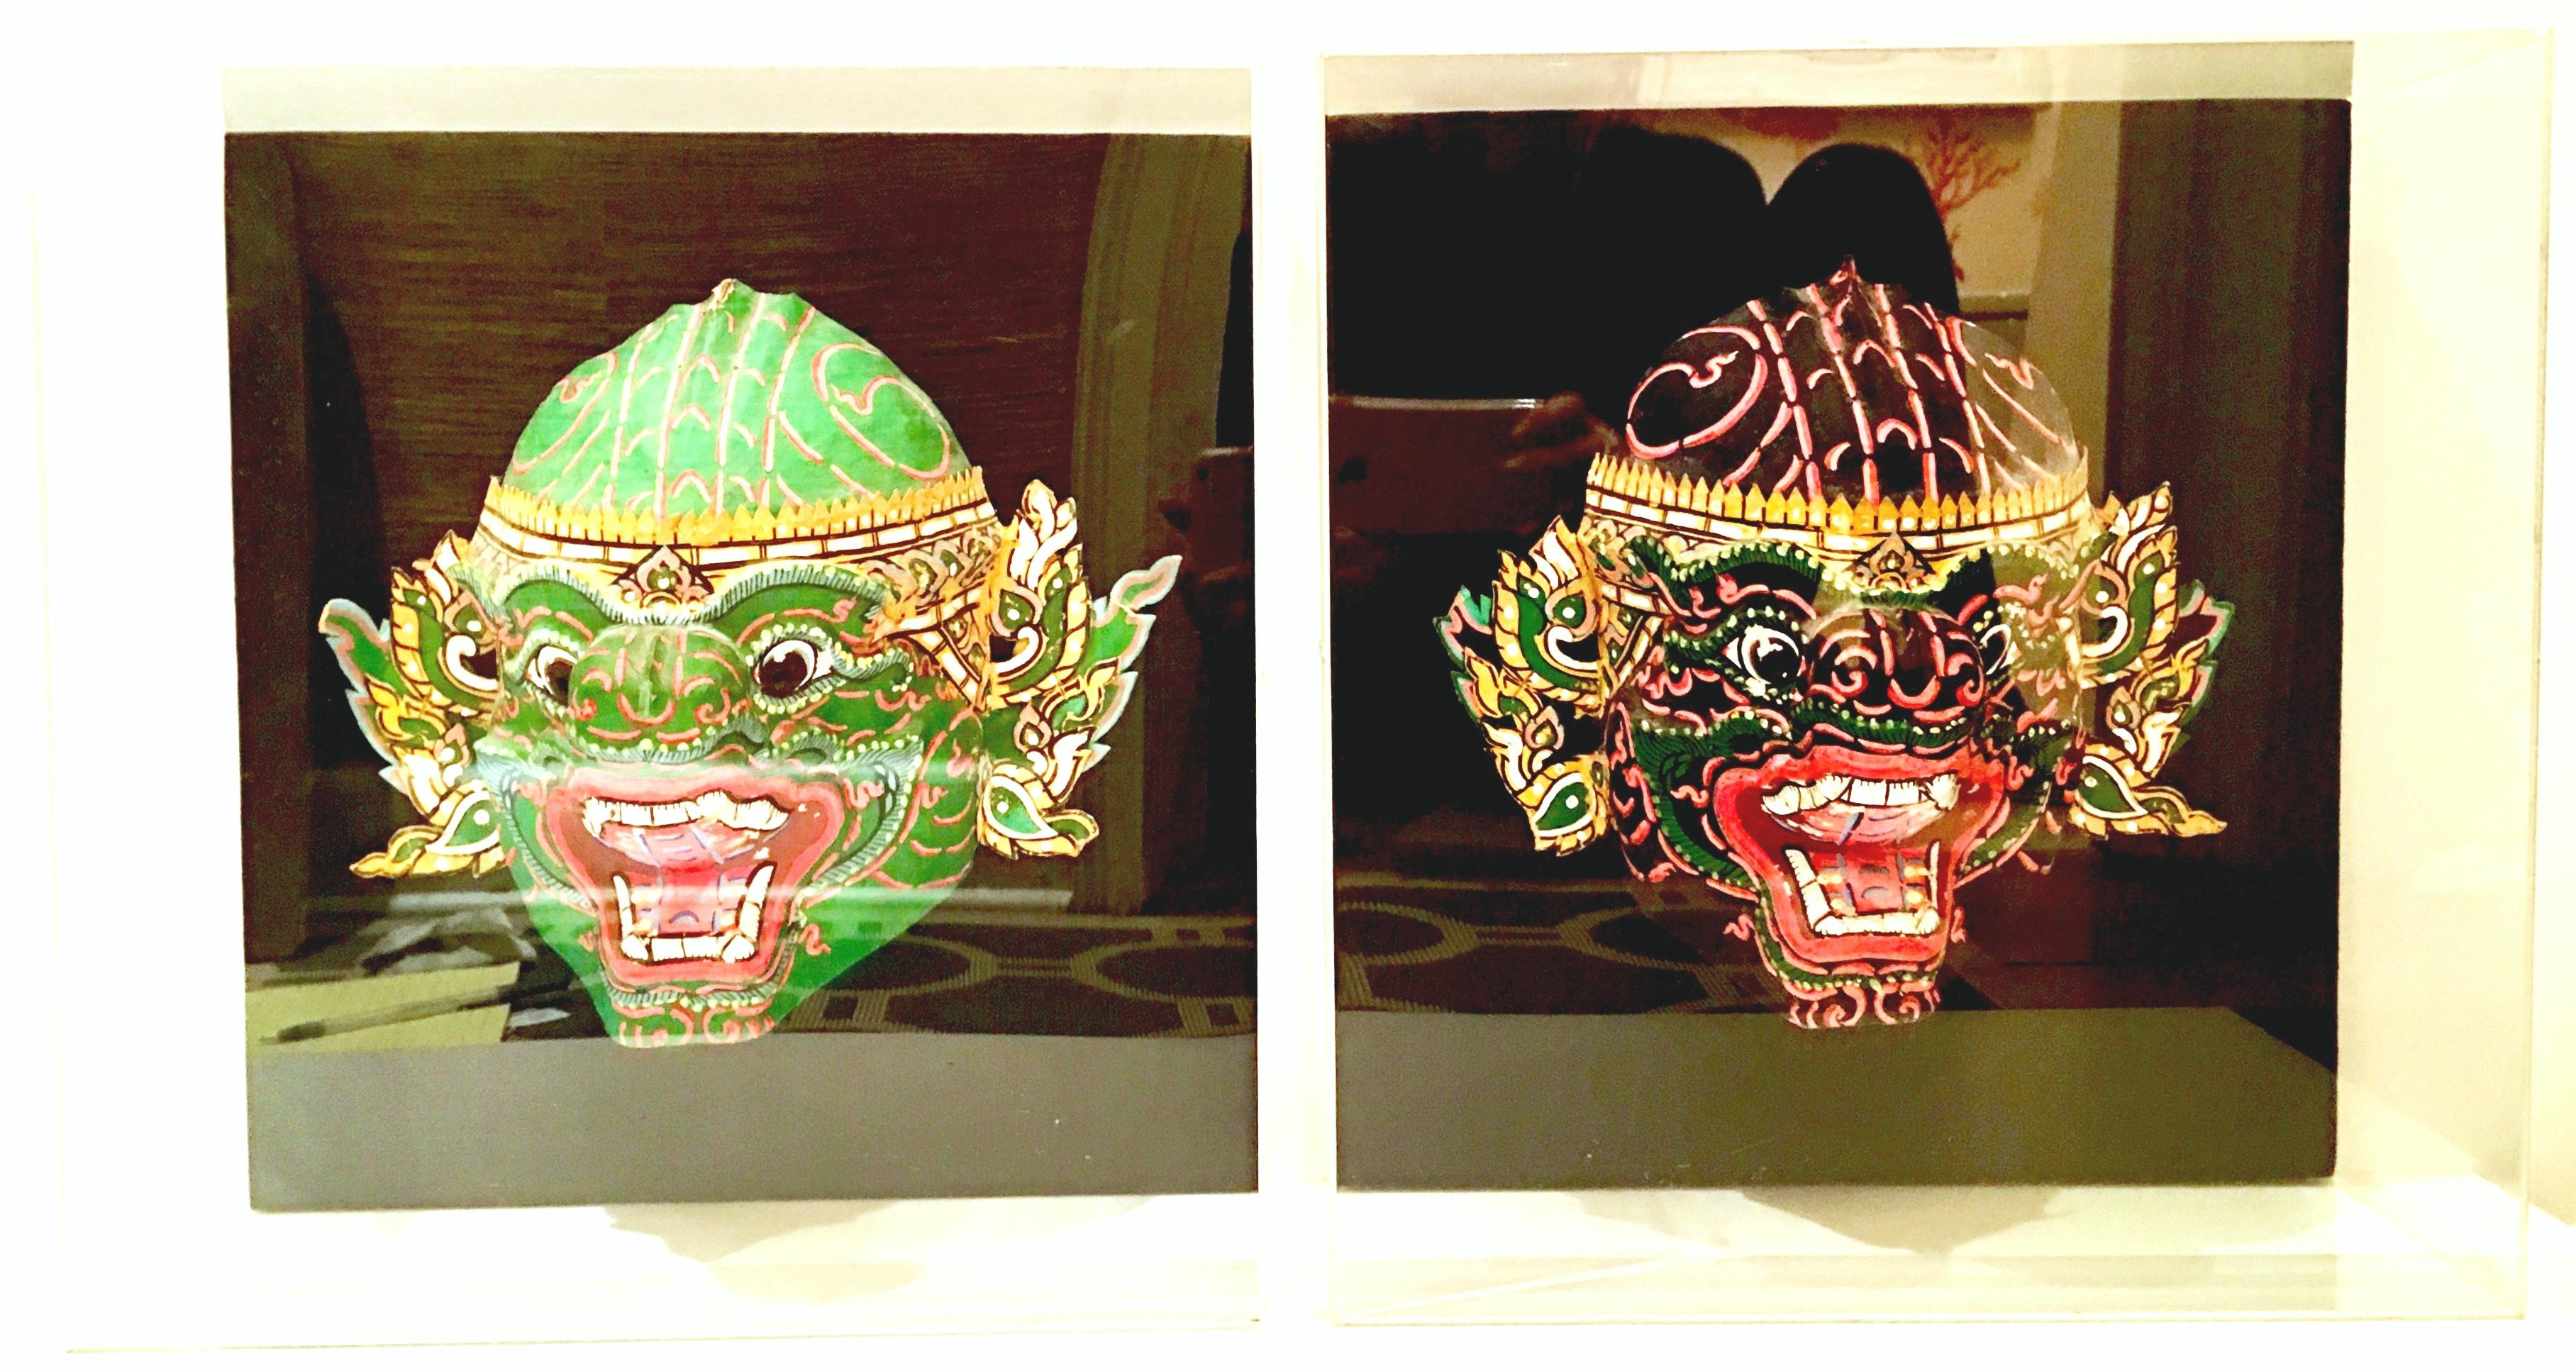 Pair of Javanese Paper Mâché hand-painted tribal celebration masks. Each mask is mounted on black linen in large Lucite shadow box frames. Each mask measures approximately, 11